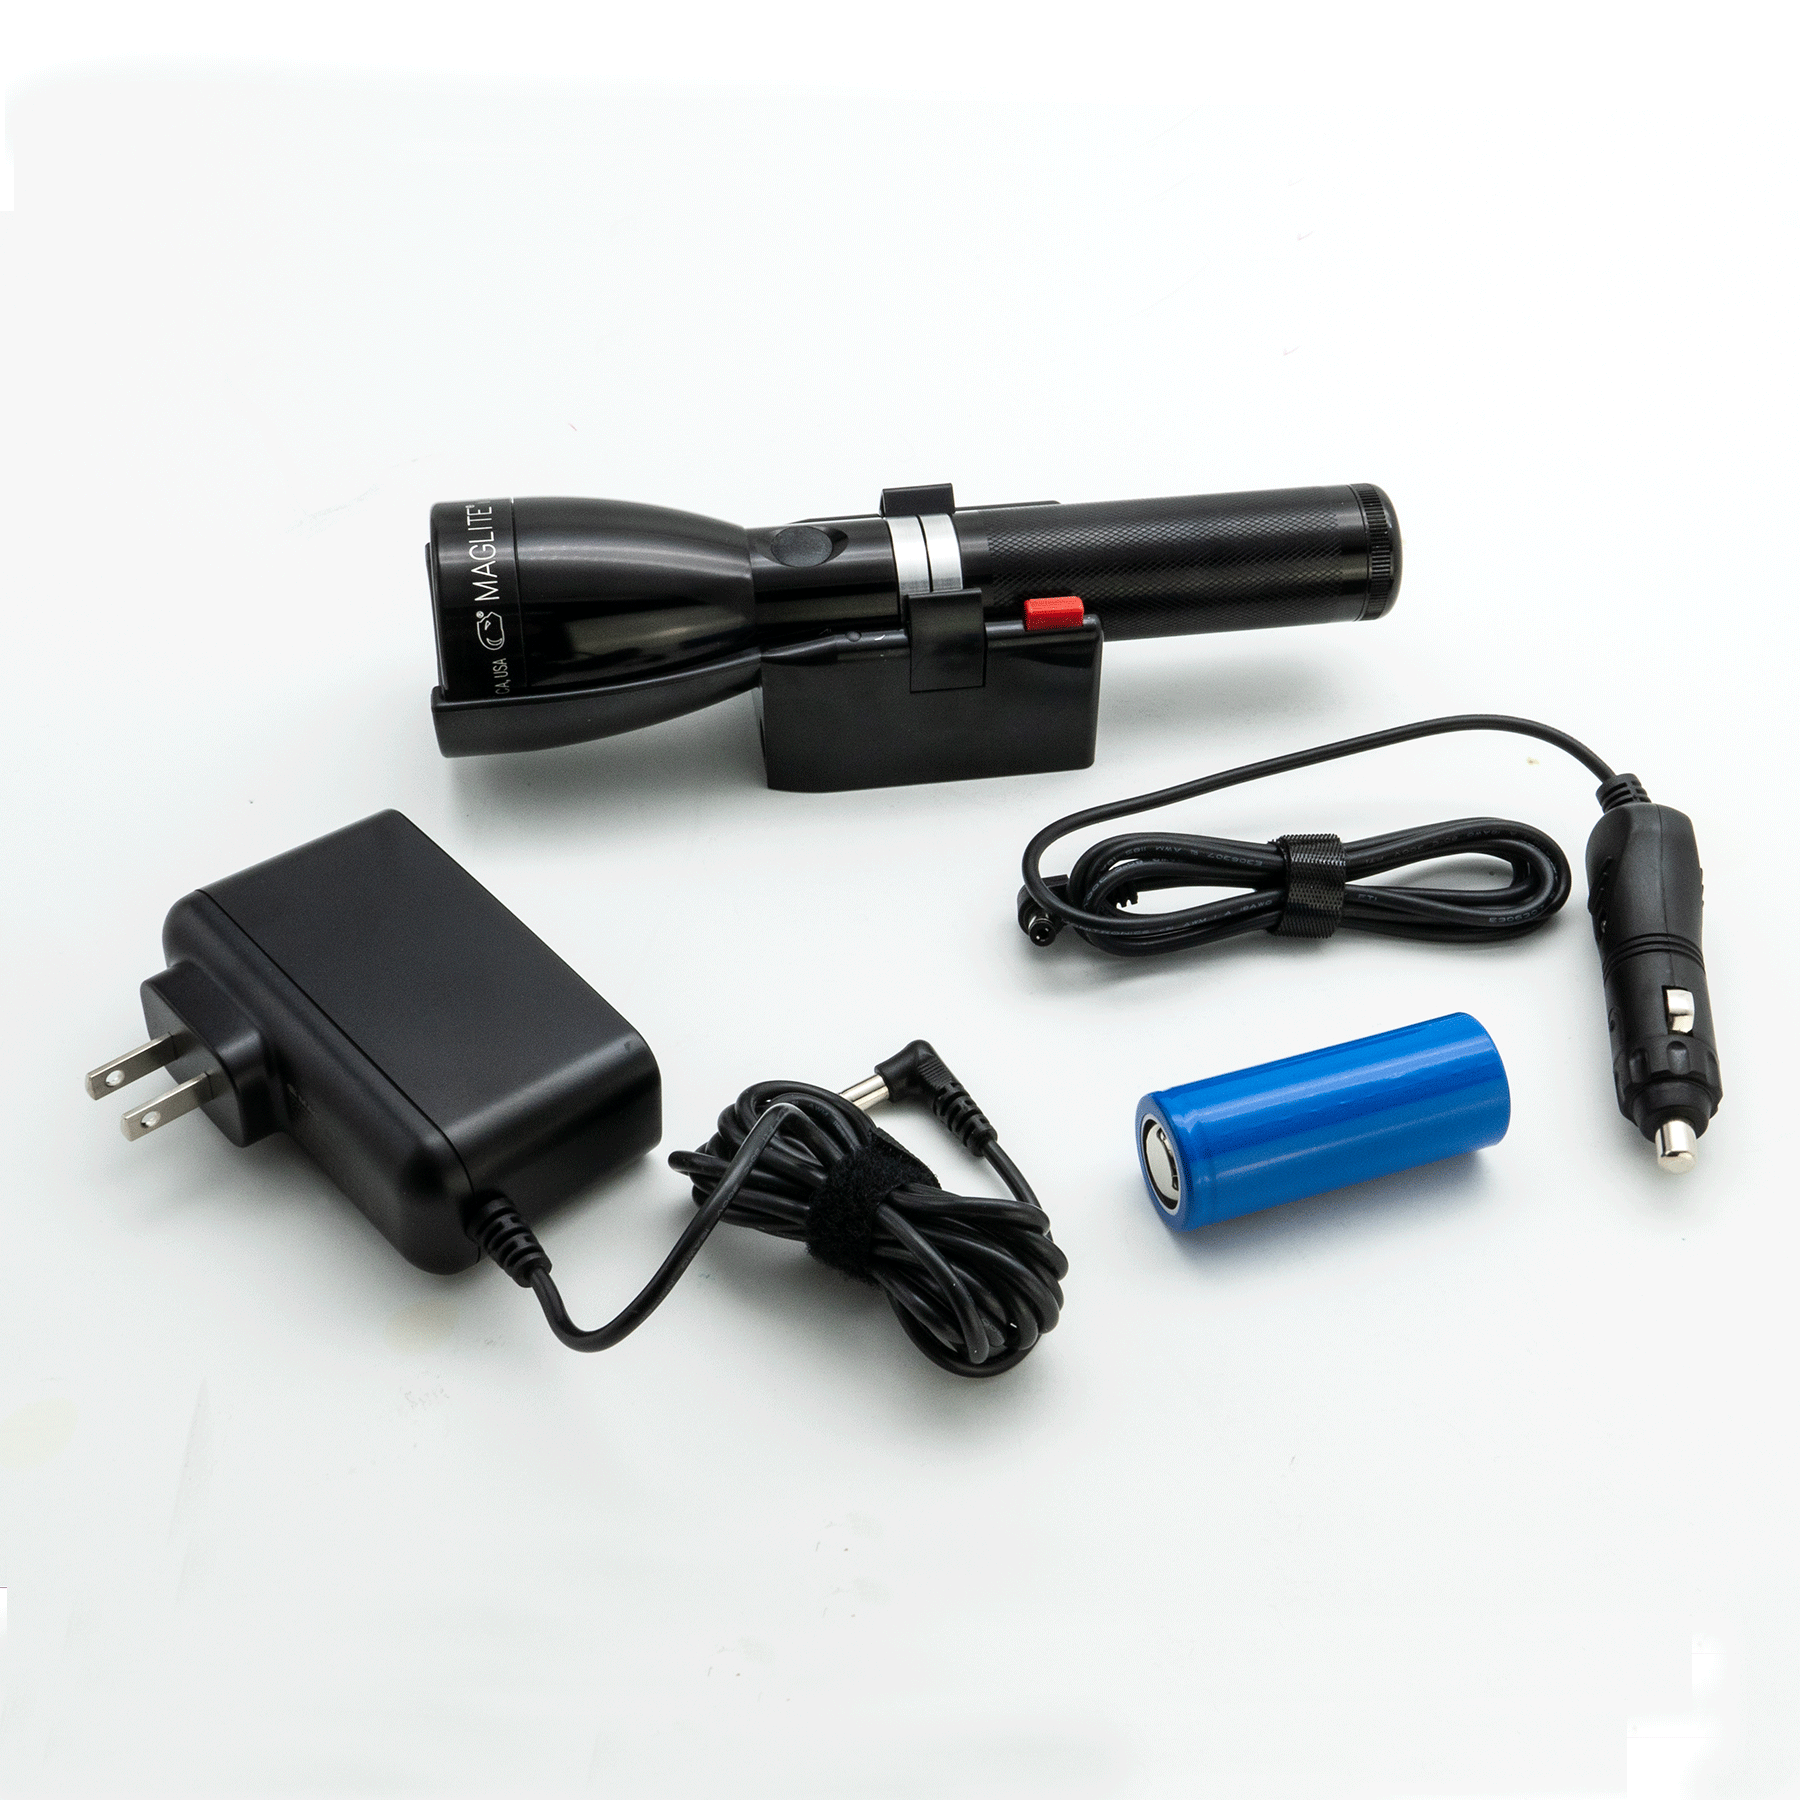 Maglite MagCharger LED Review - LED-Resource